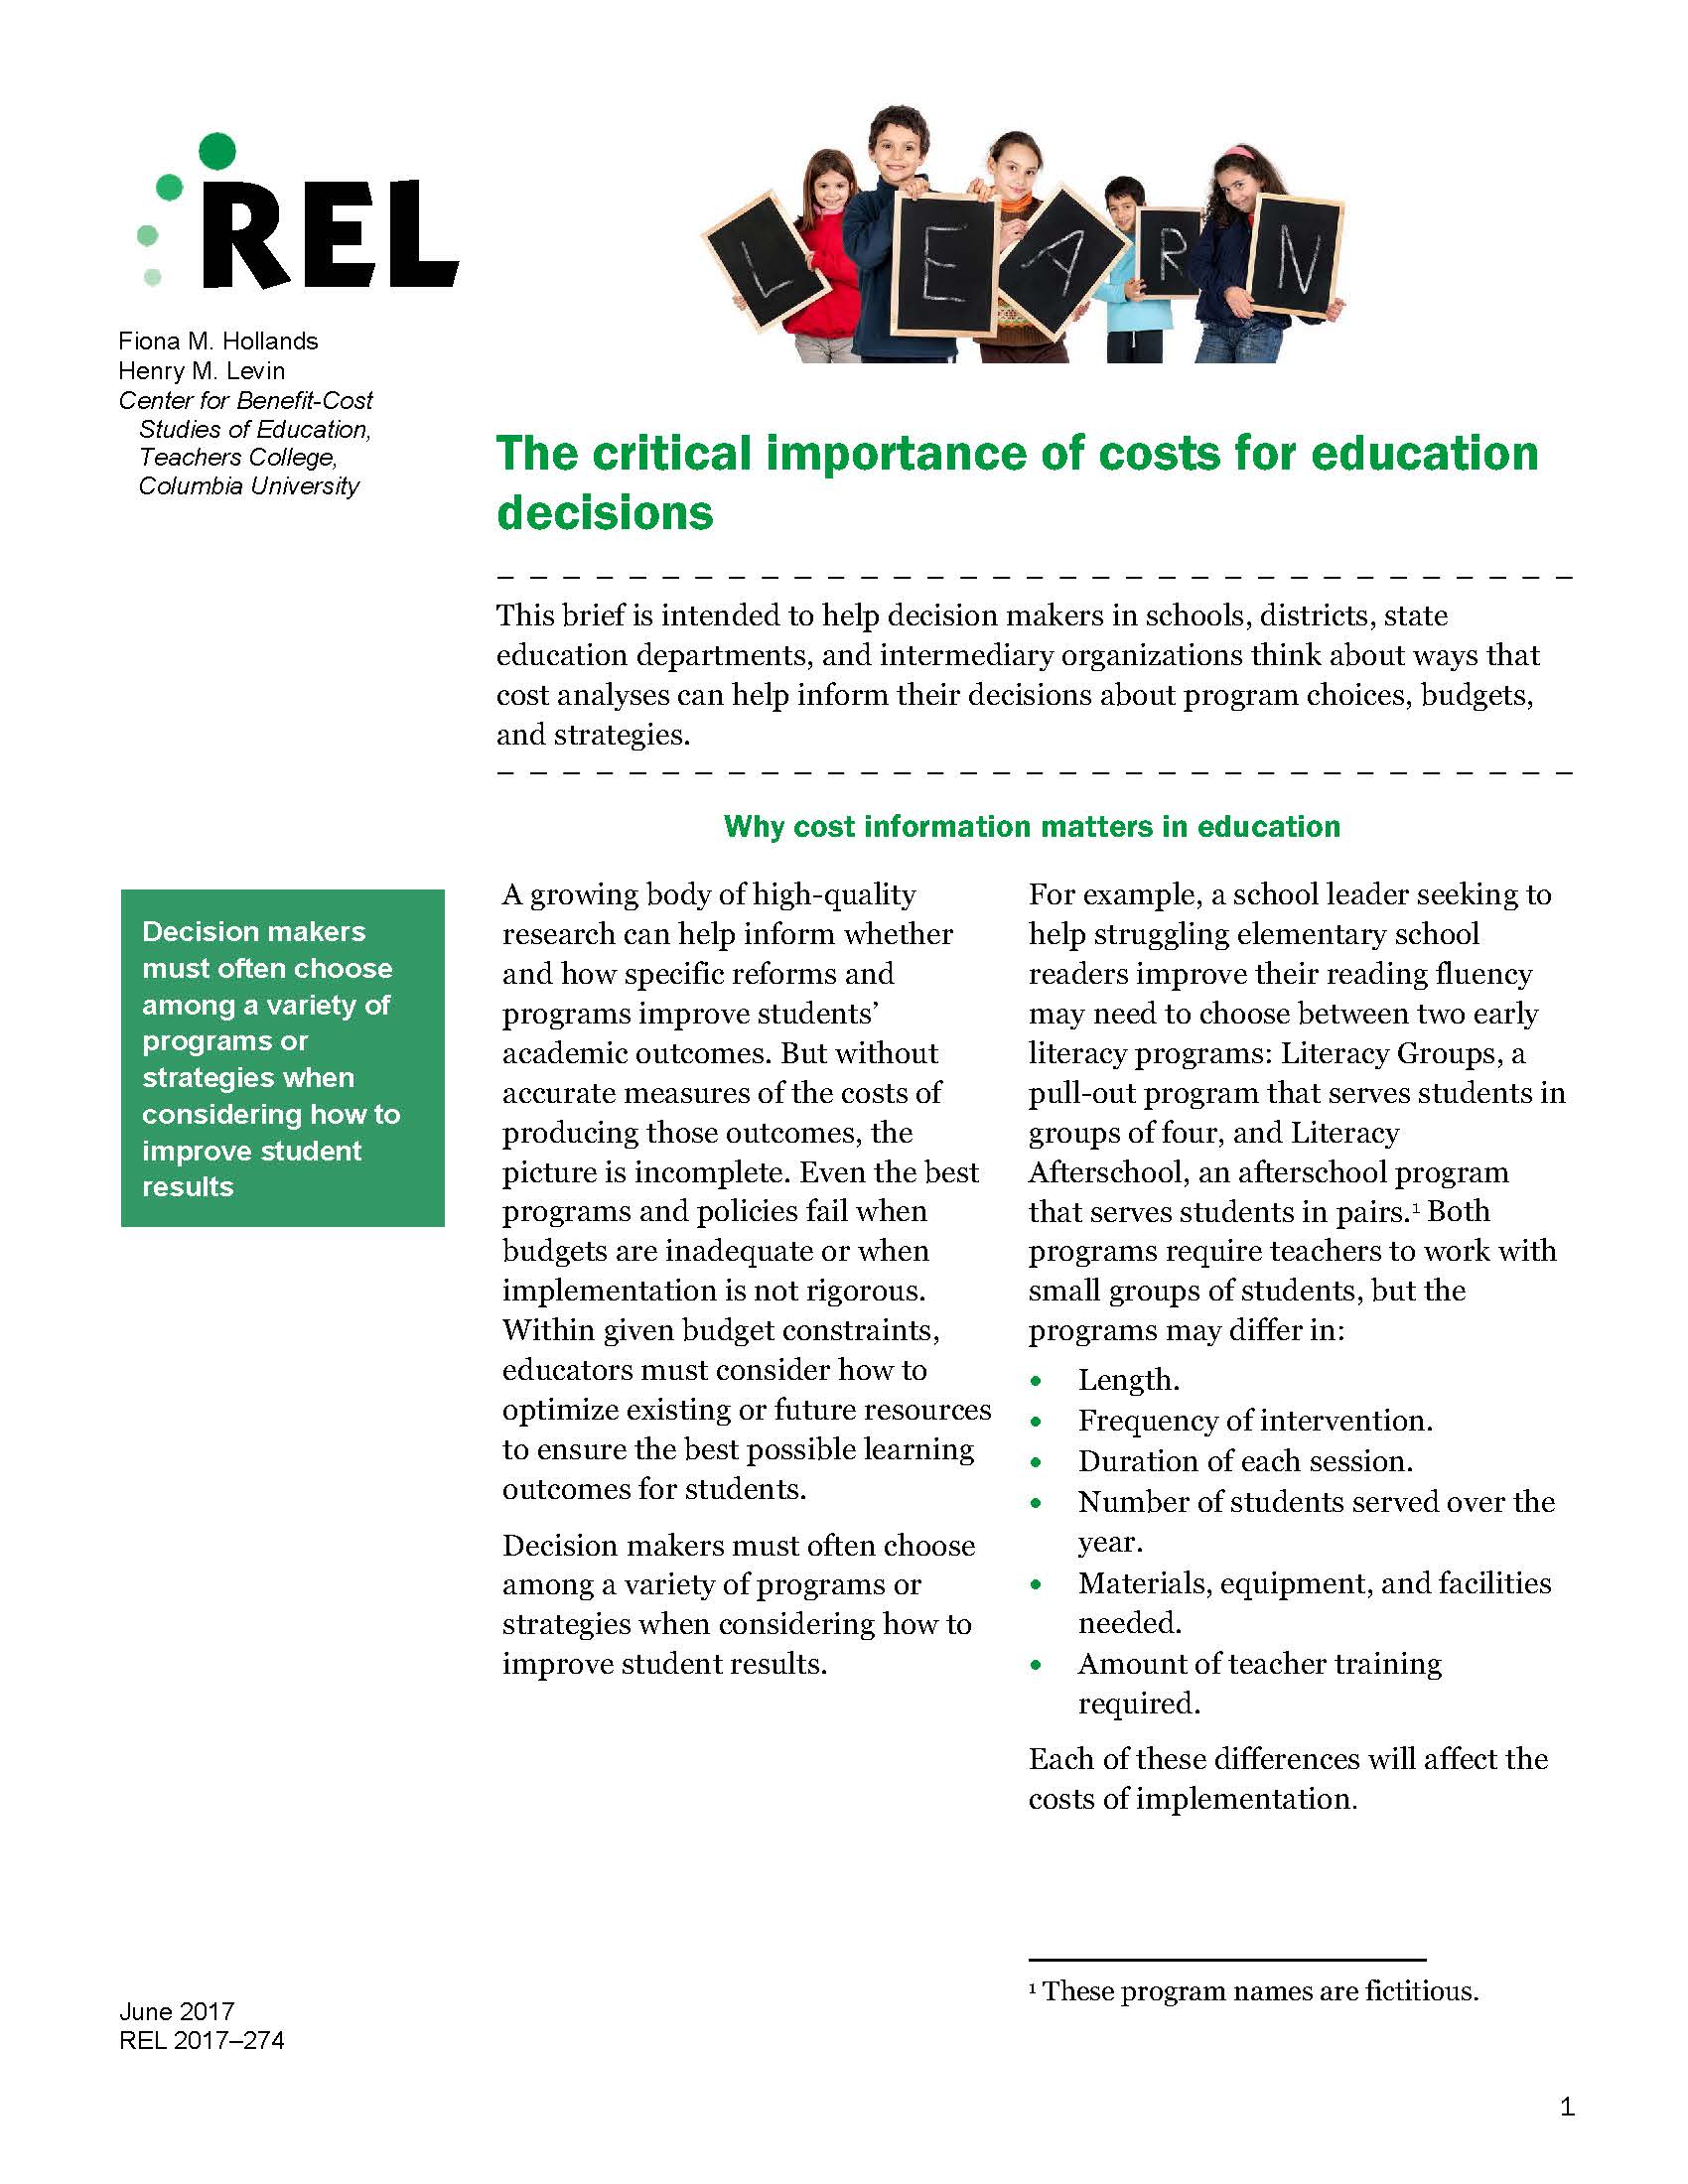 REL: The Critical Importance of Costs for Education Decisions